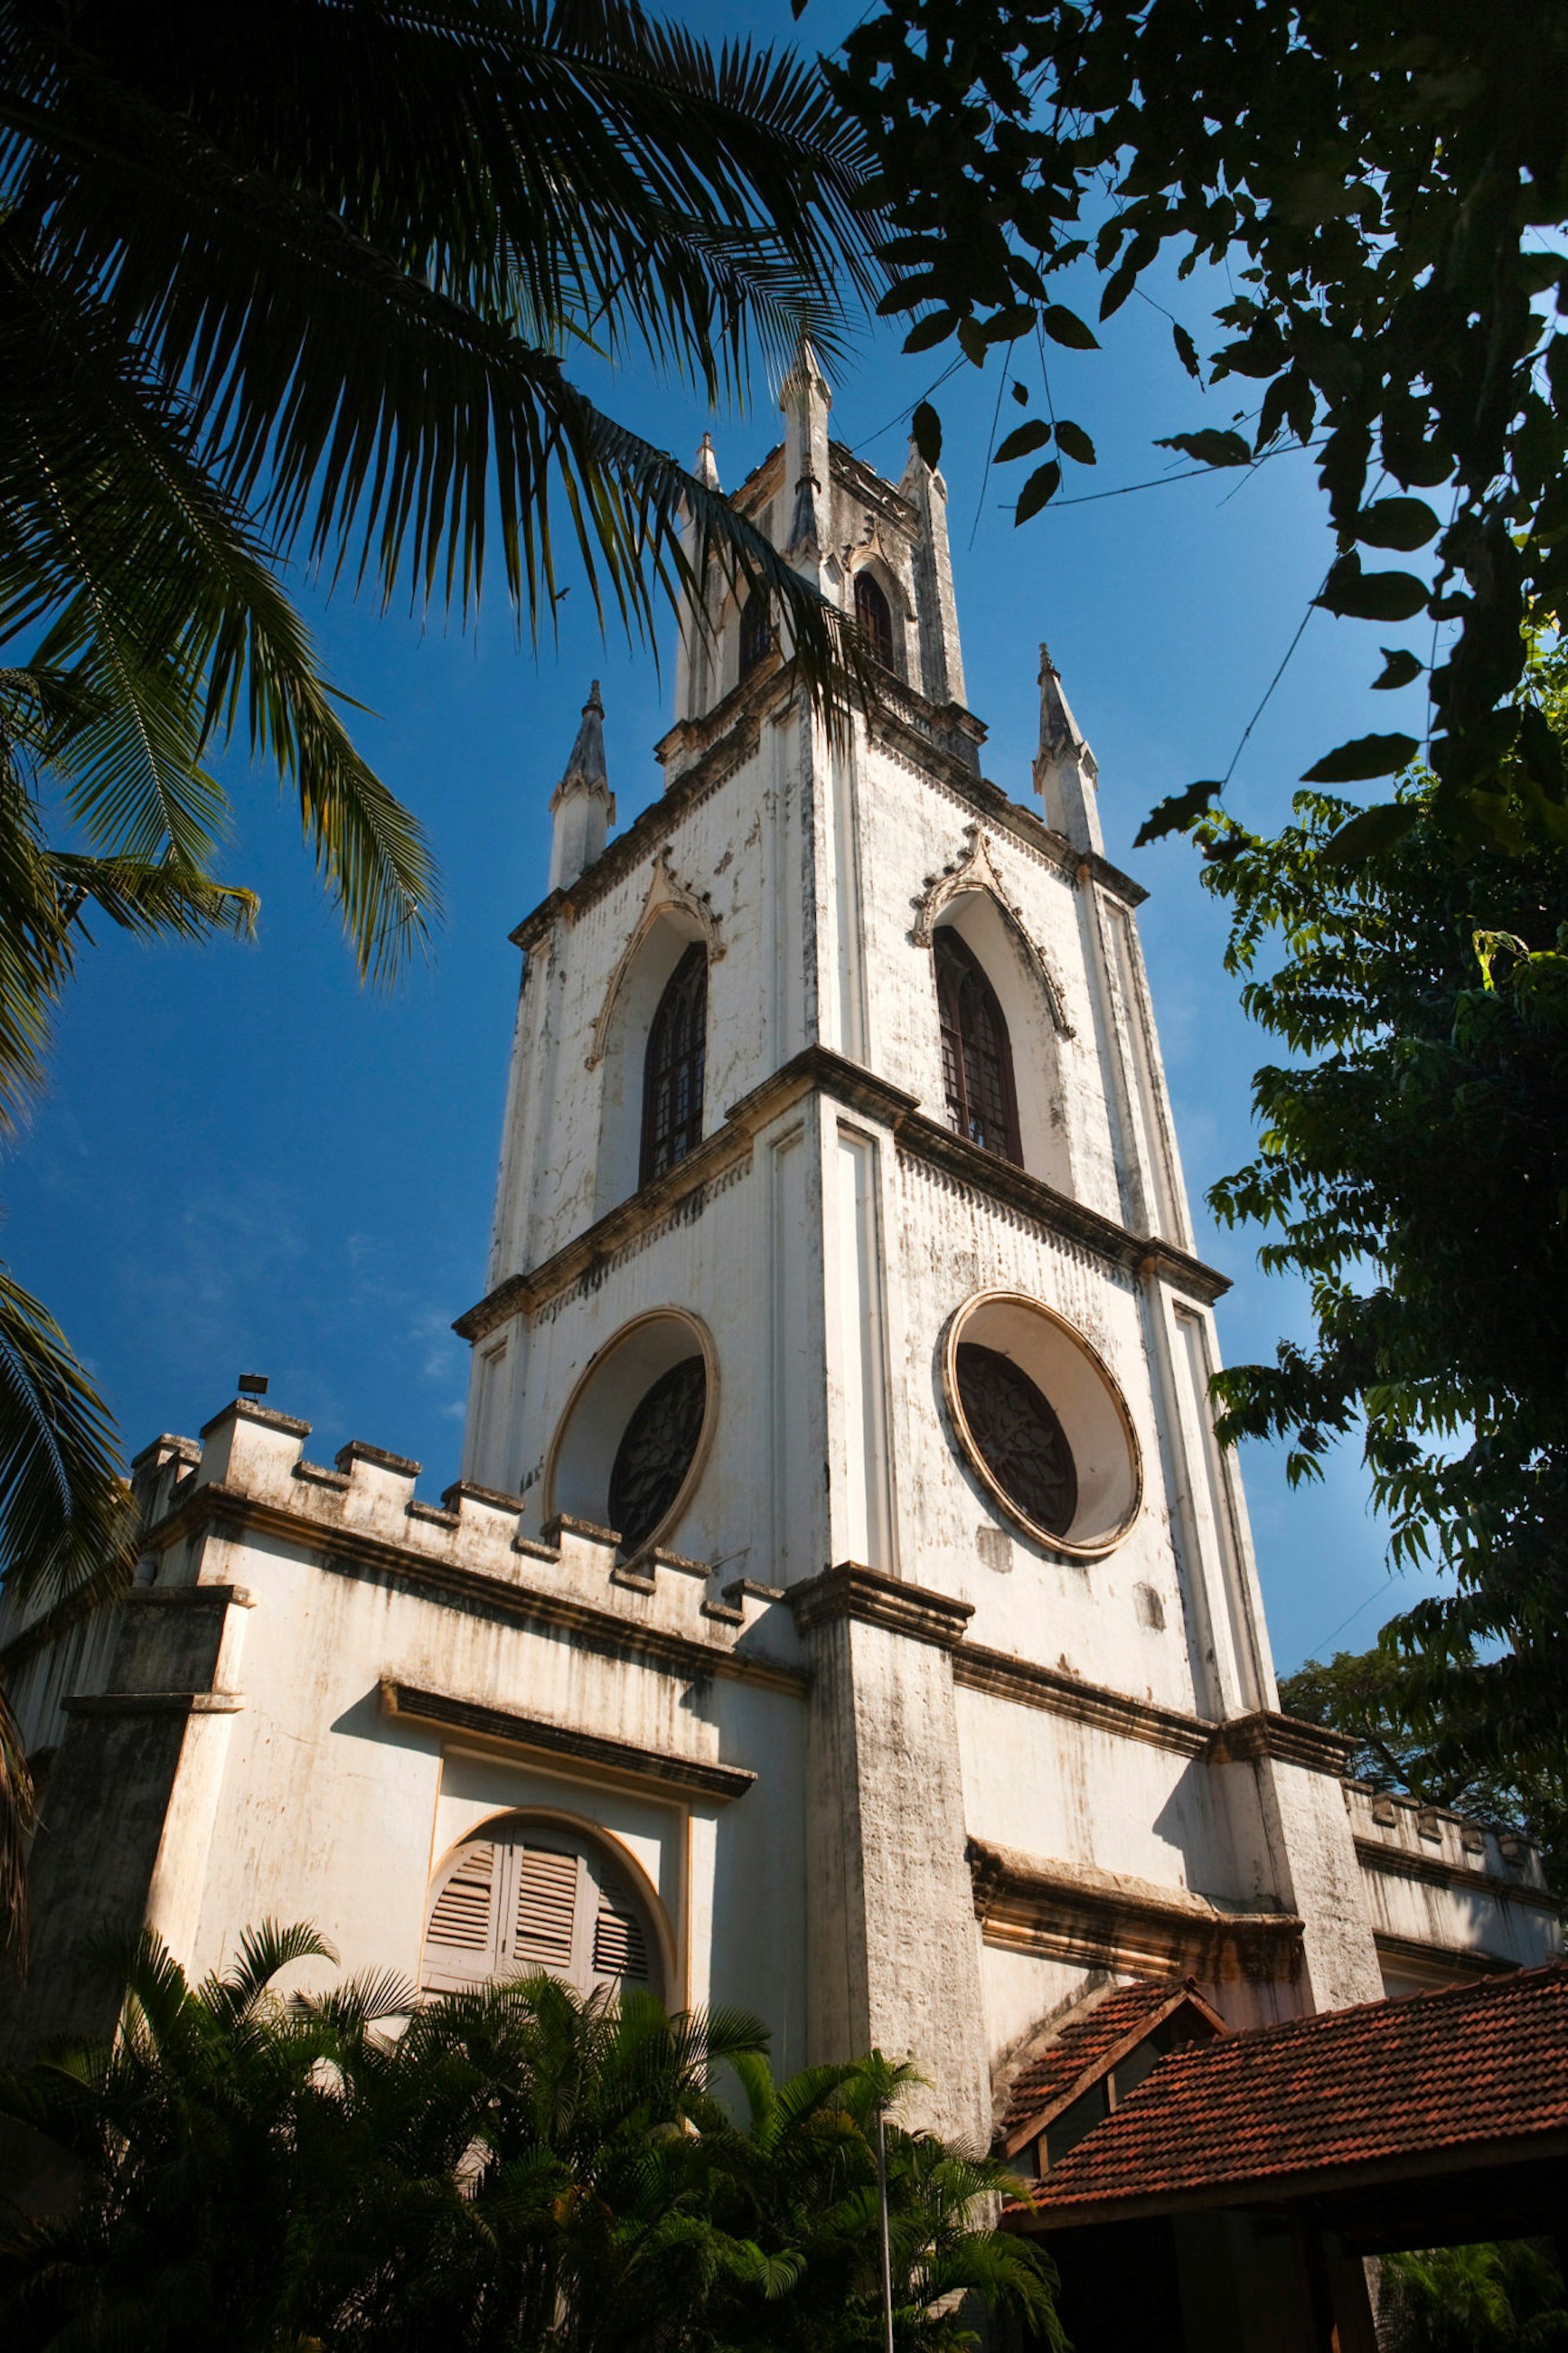 The spire of St Thomas' Cathedral, the oldest British building in Mumbai © Huw Jones / Getty Images